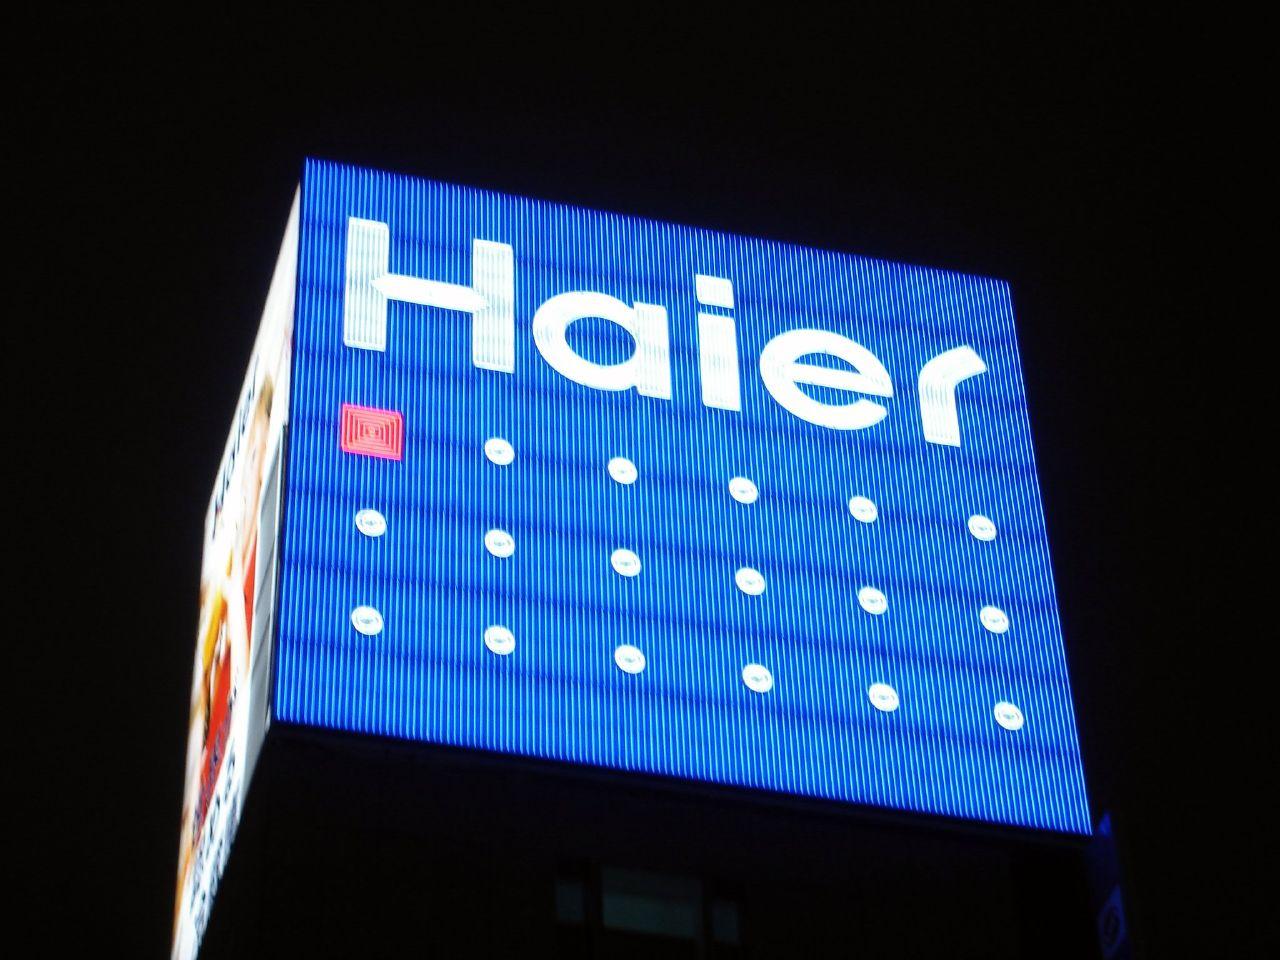 Haier sign in